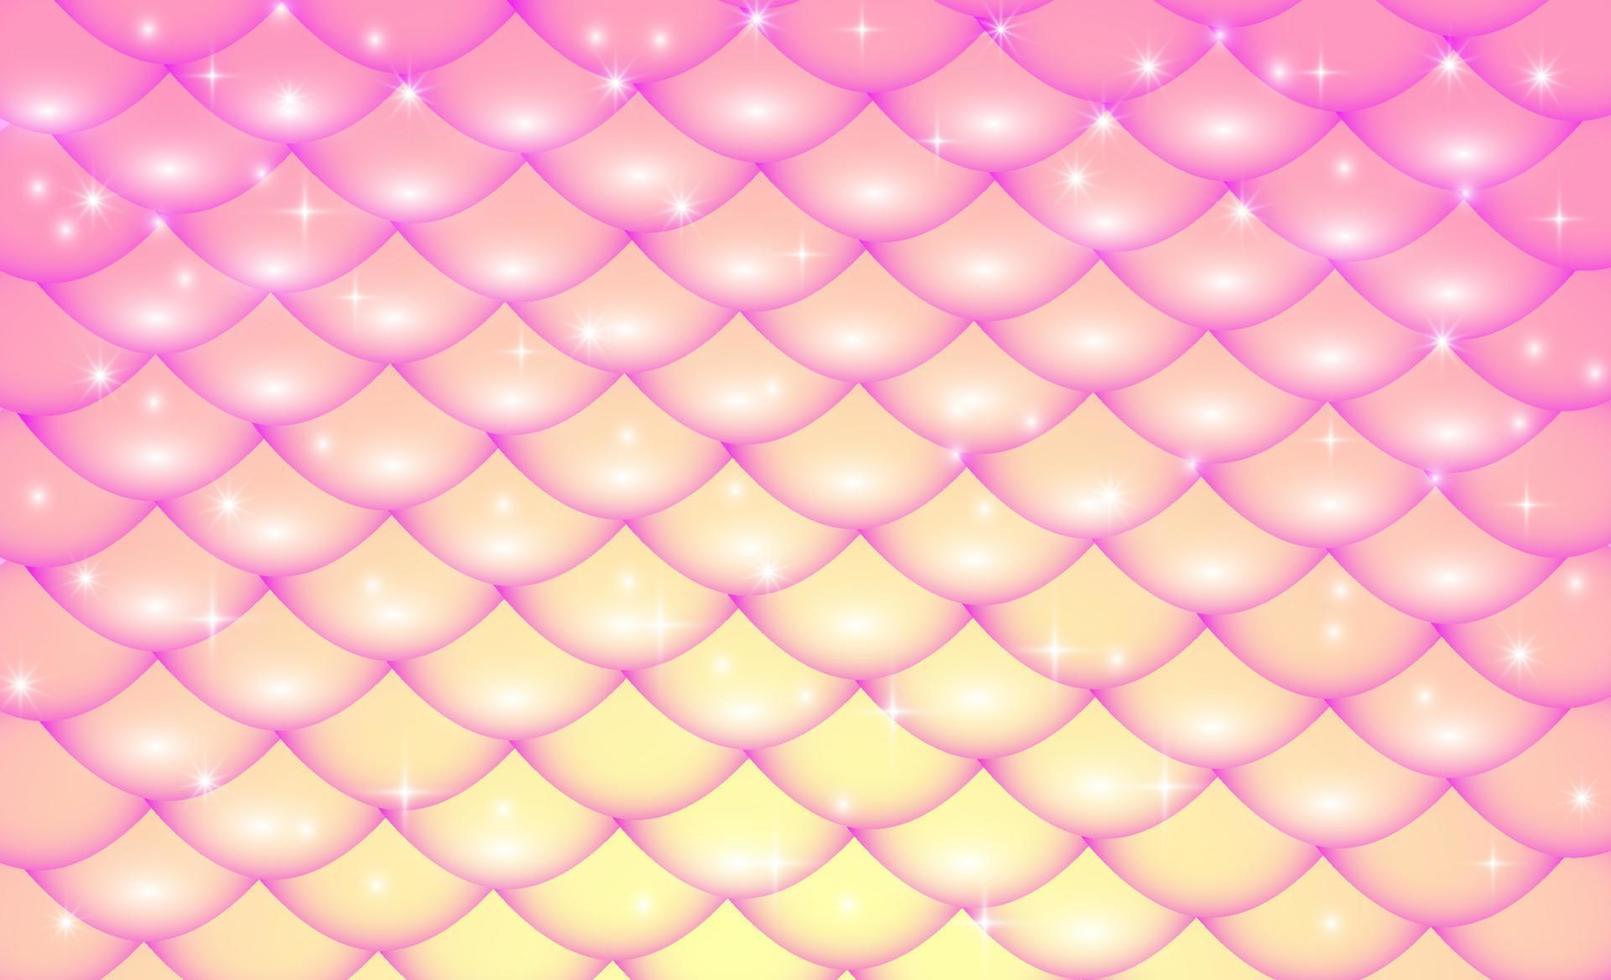 Colored mermaid scales, fish scales. Fantasy background in sparkling stars for design. vector